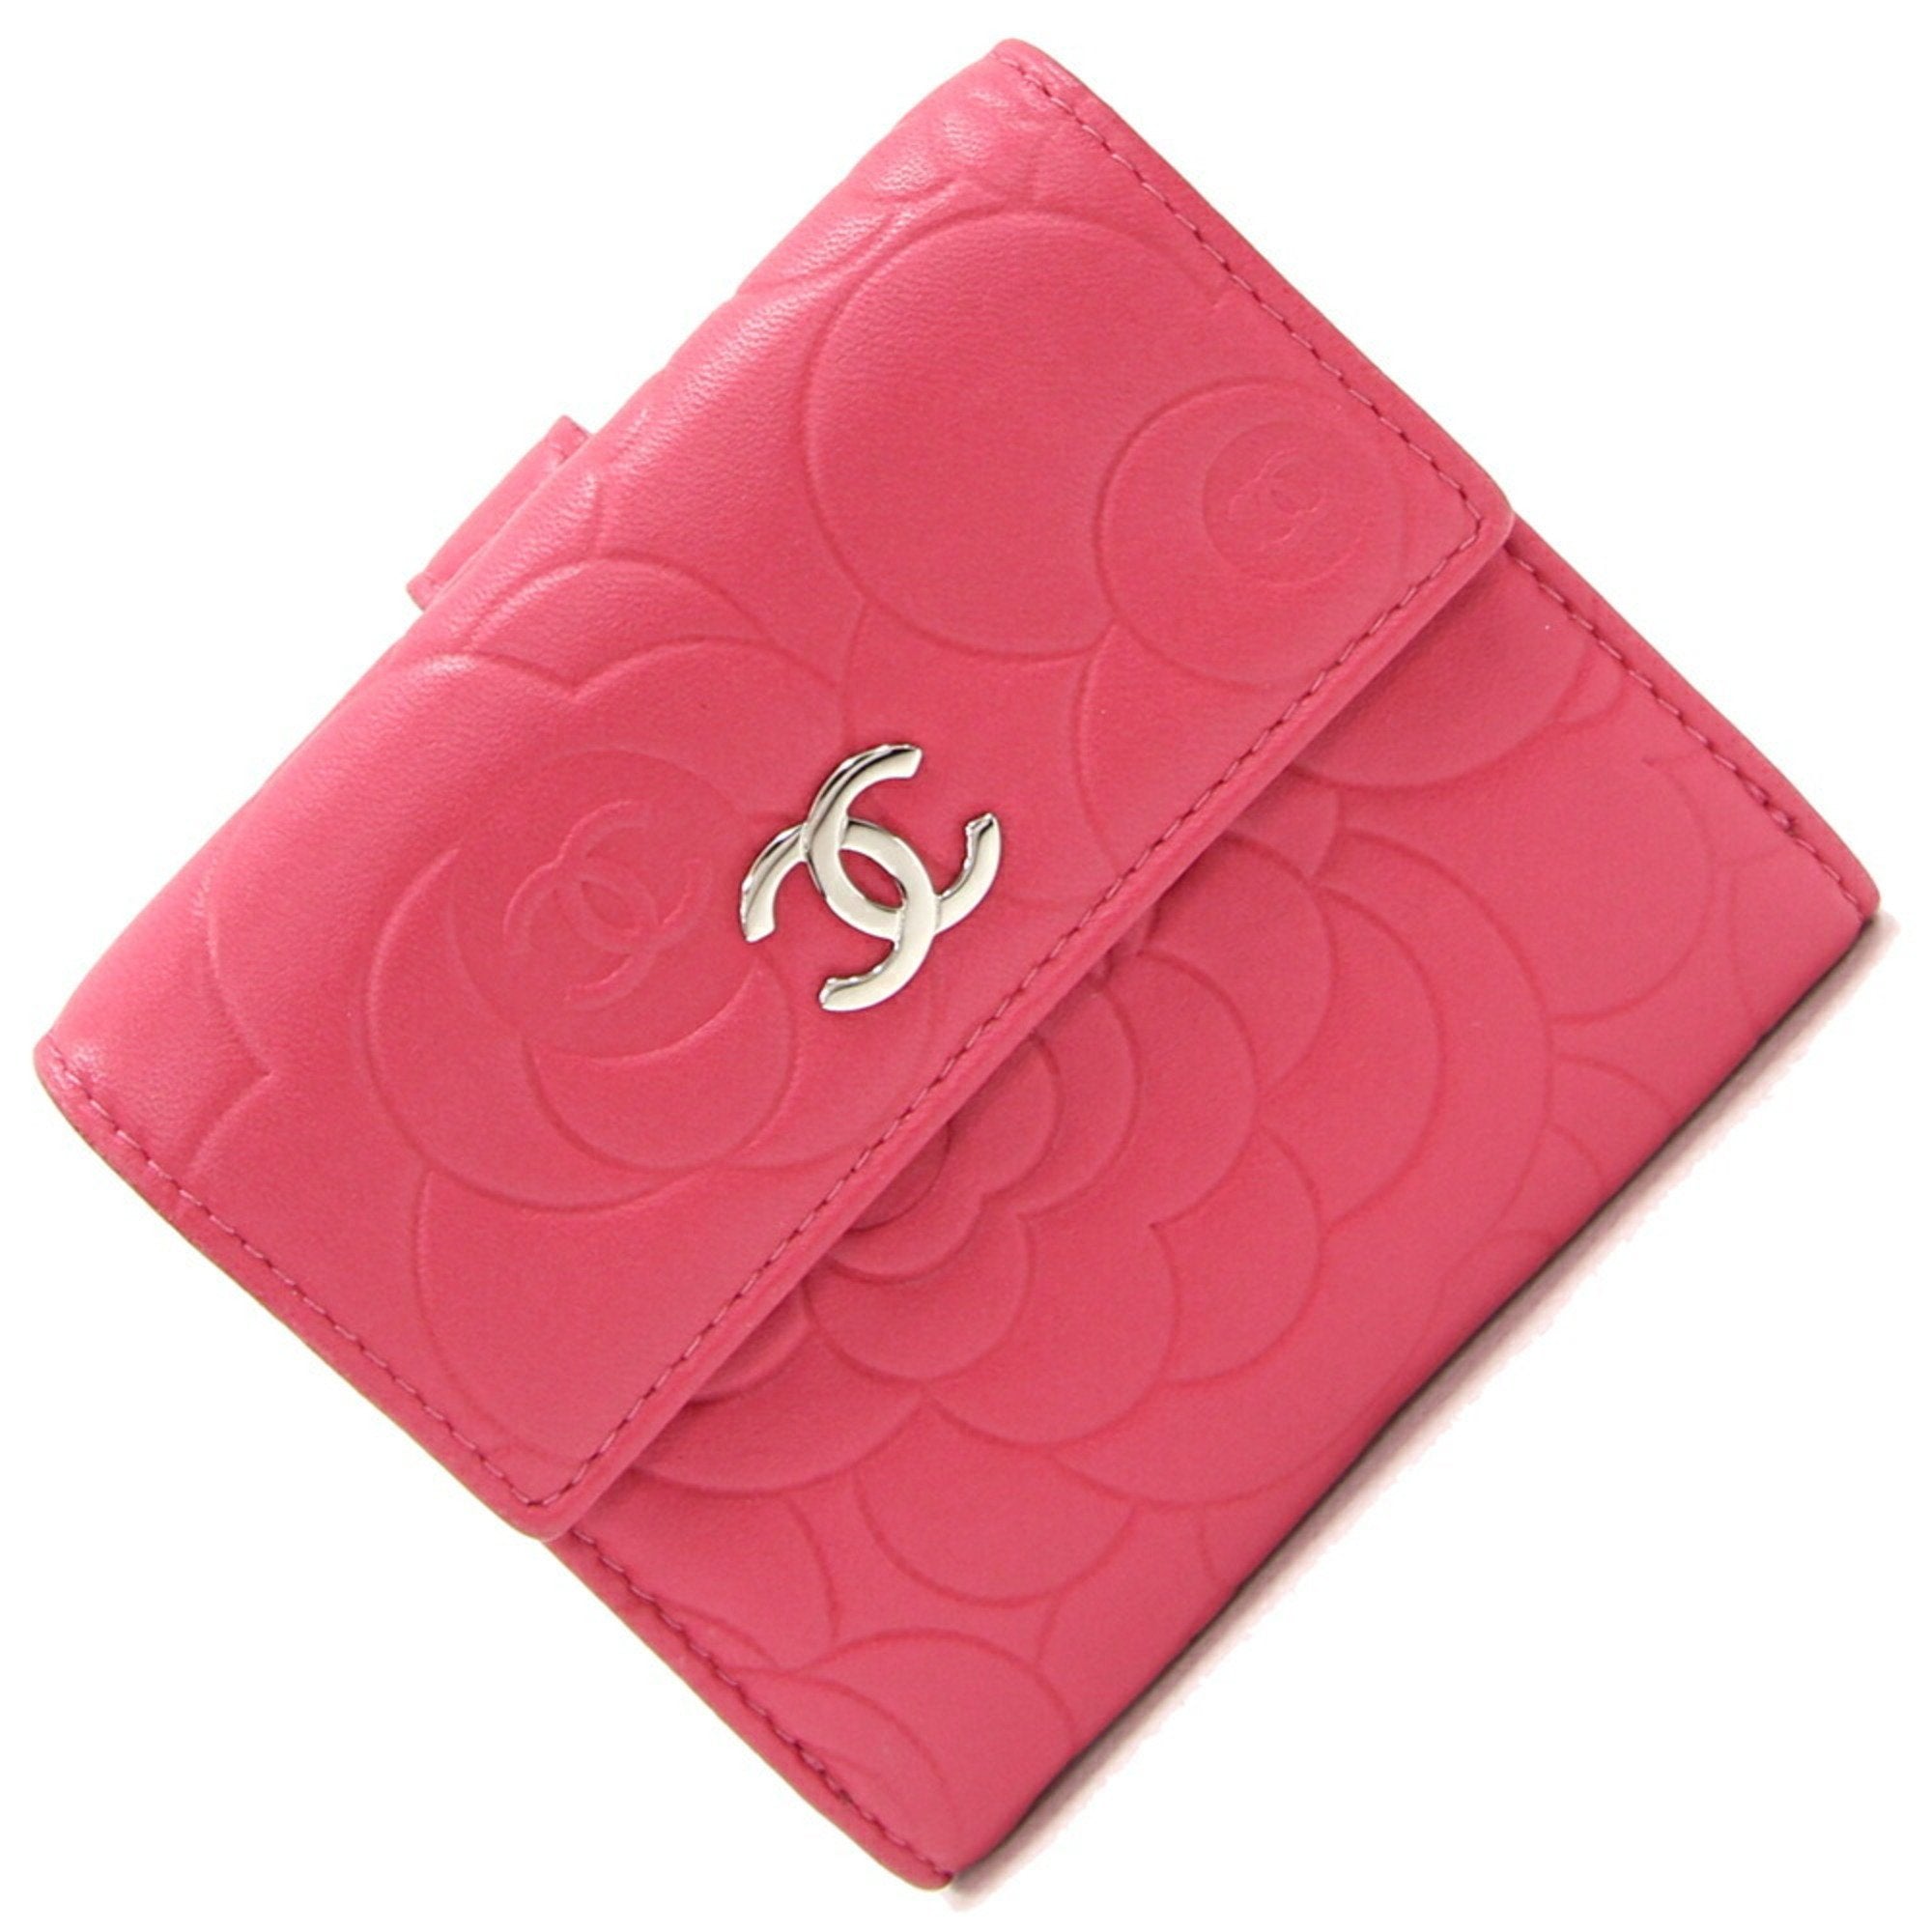 W Wallet Camellia Pink Leather Double Sided Compact Mark Women's